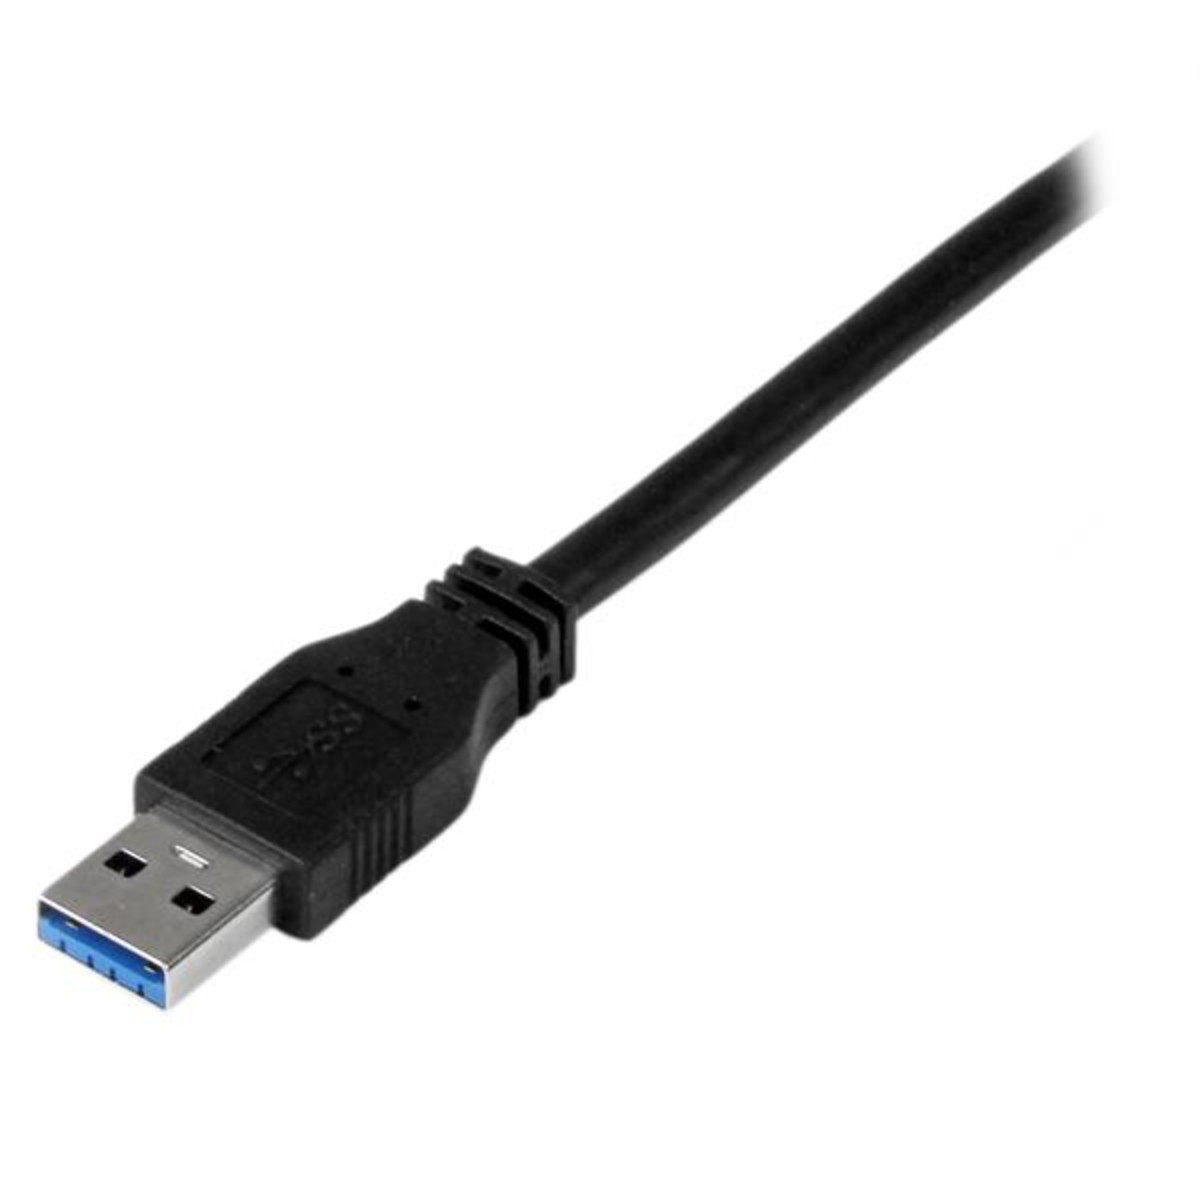 1m SS USB 3.0 A to B Cable